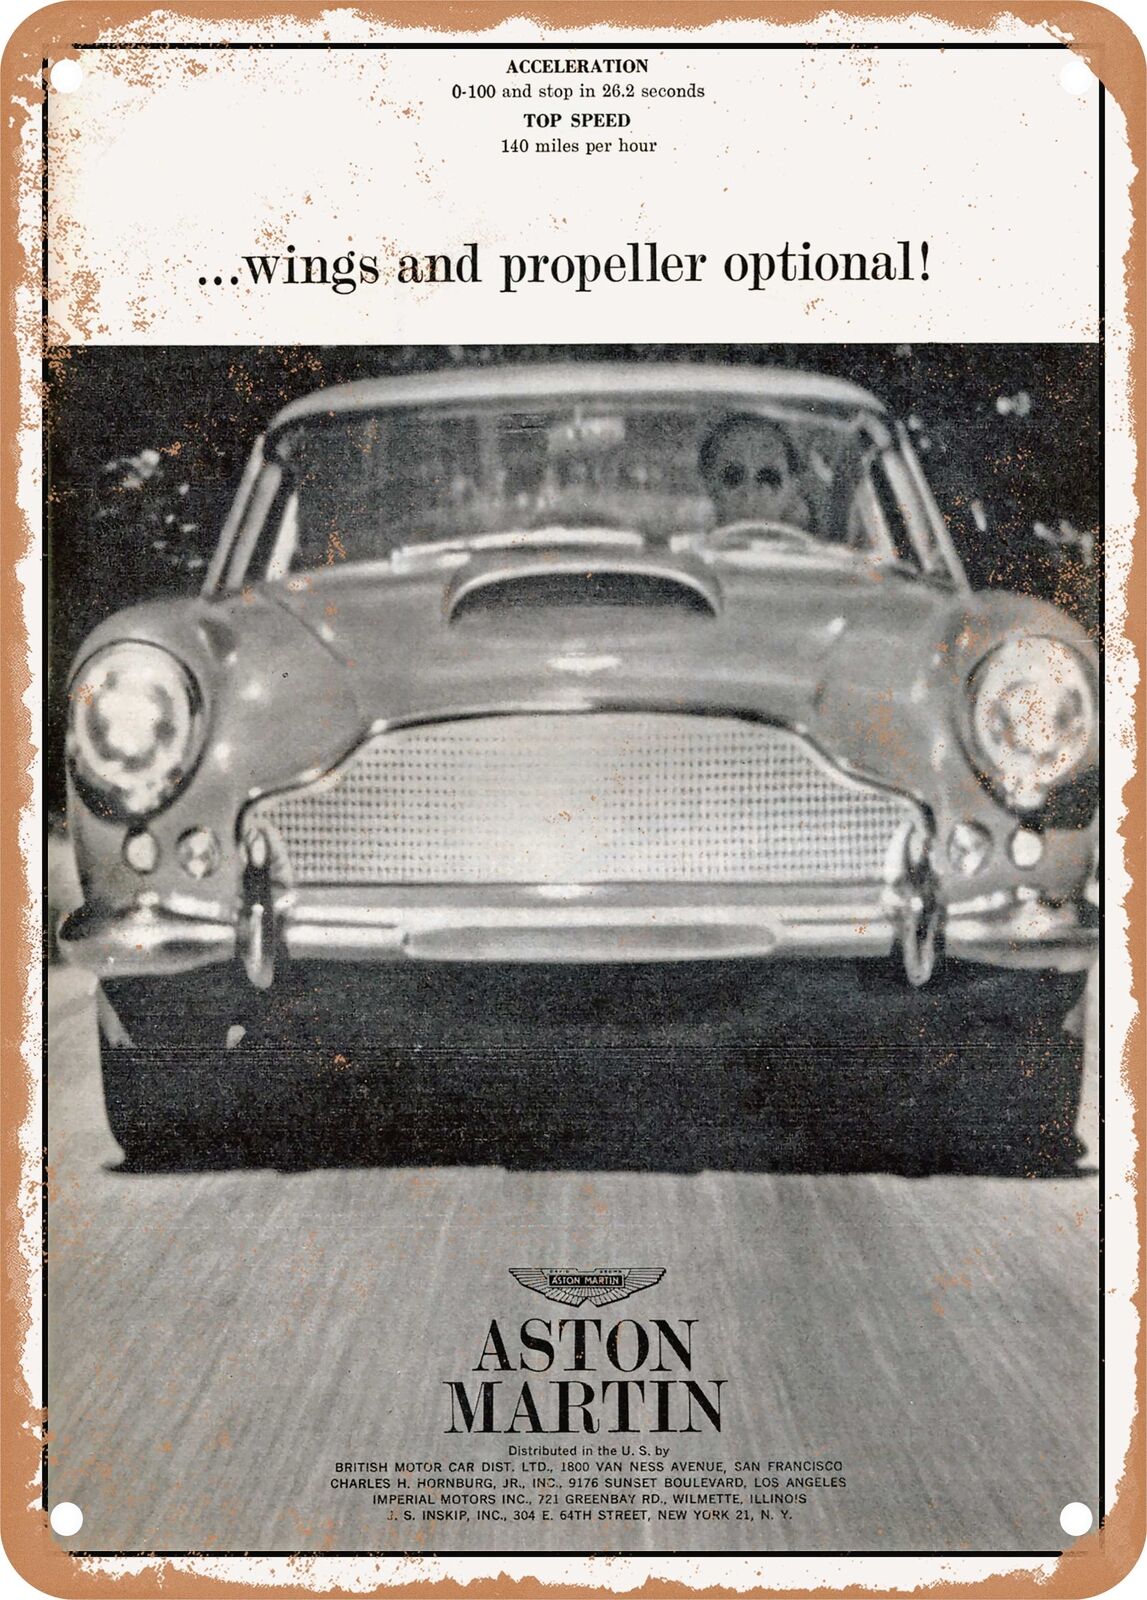 METAL SIGN - 1961 Aston Martin wings and Propeller Optional Vintage Ad